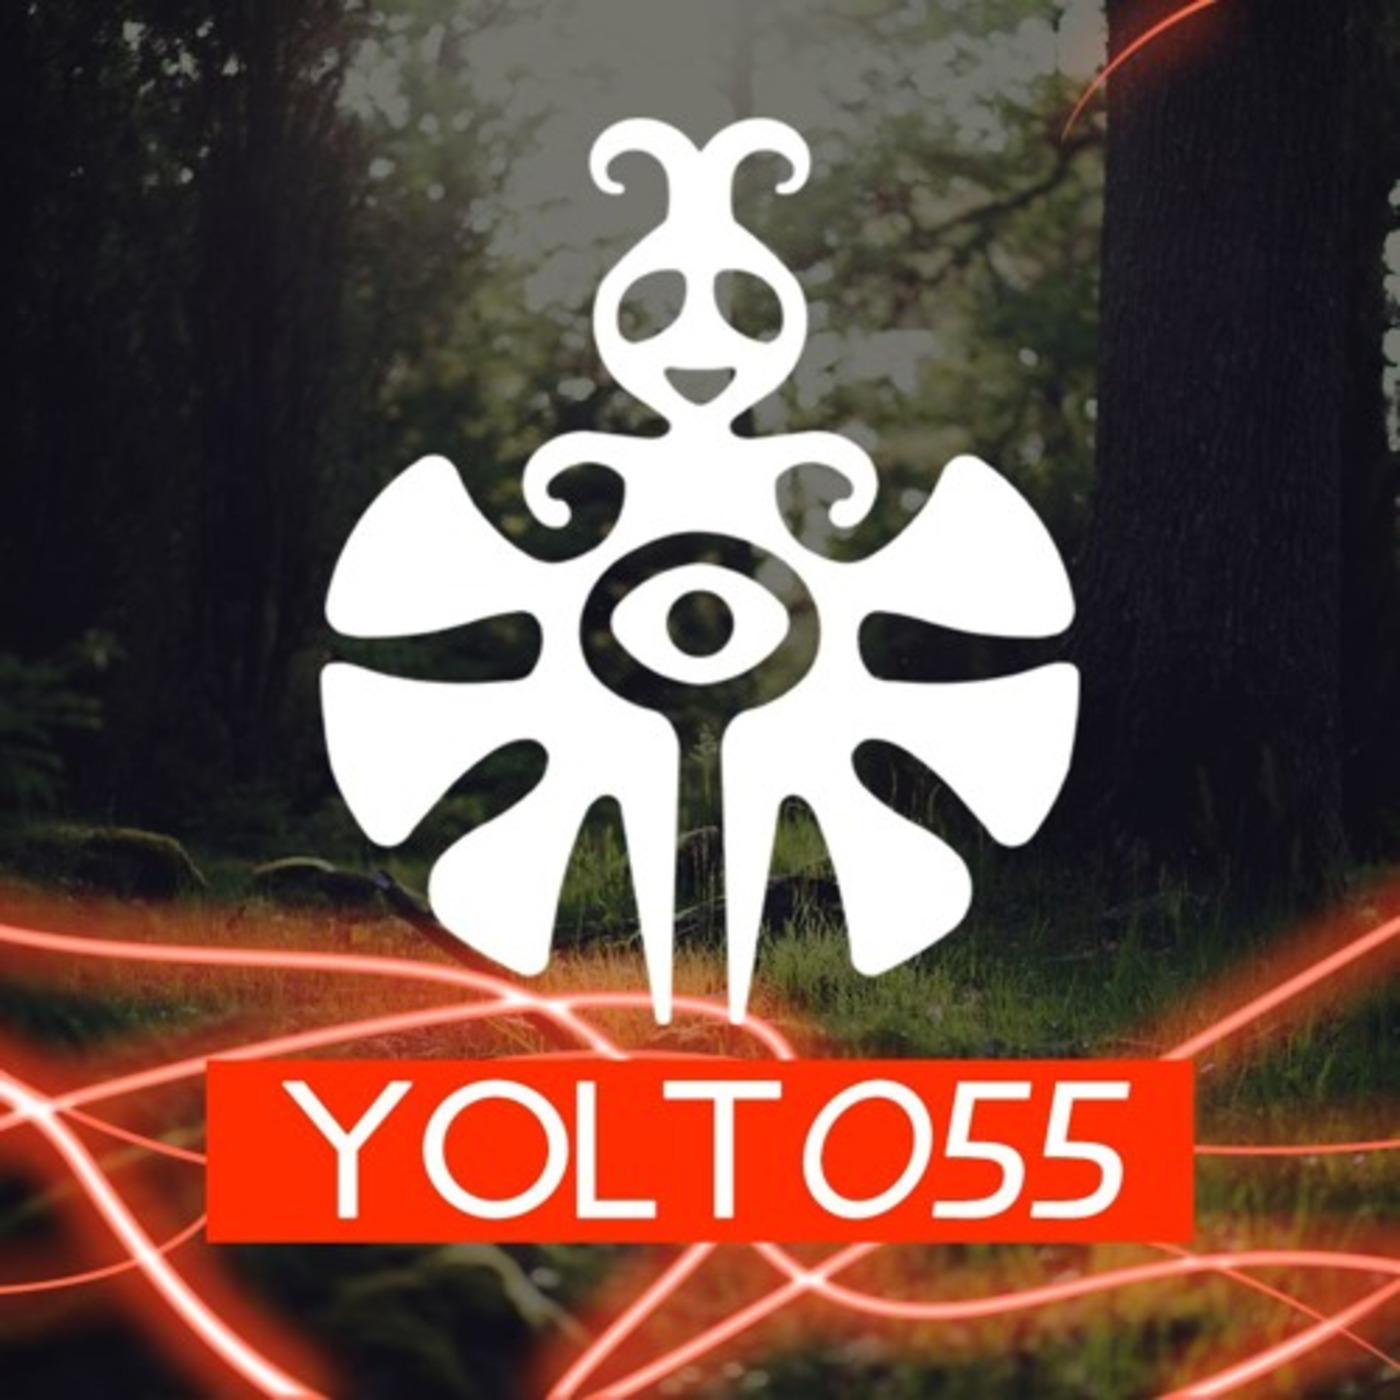 You Only Live Trance Episode 055 (#YOLT055) - Ness